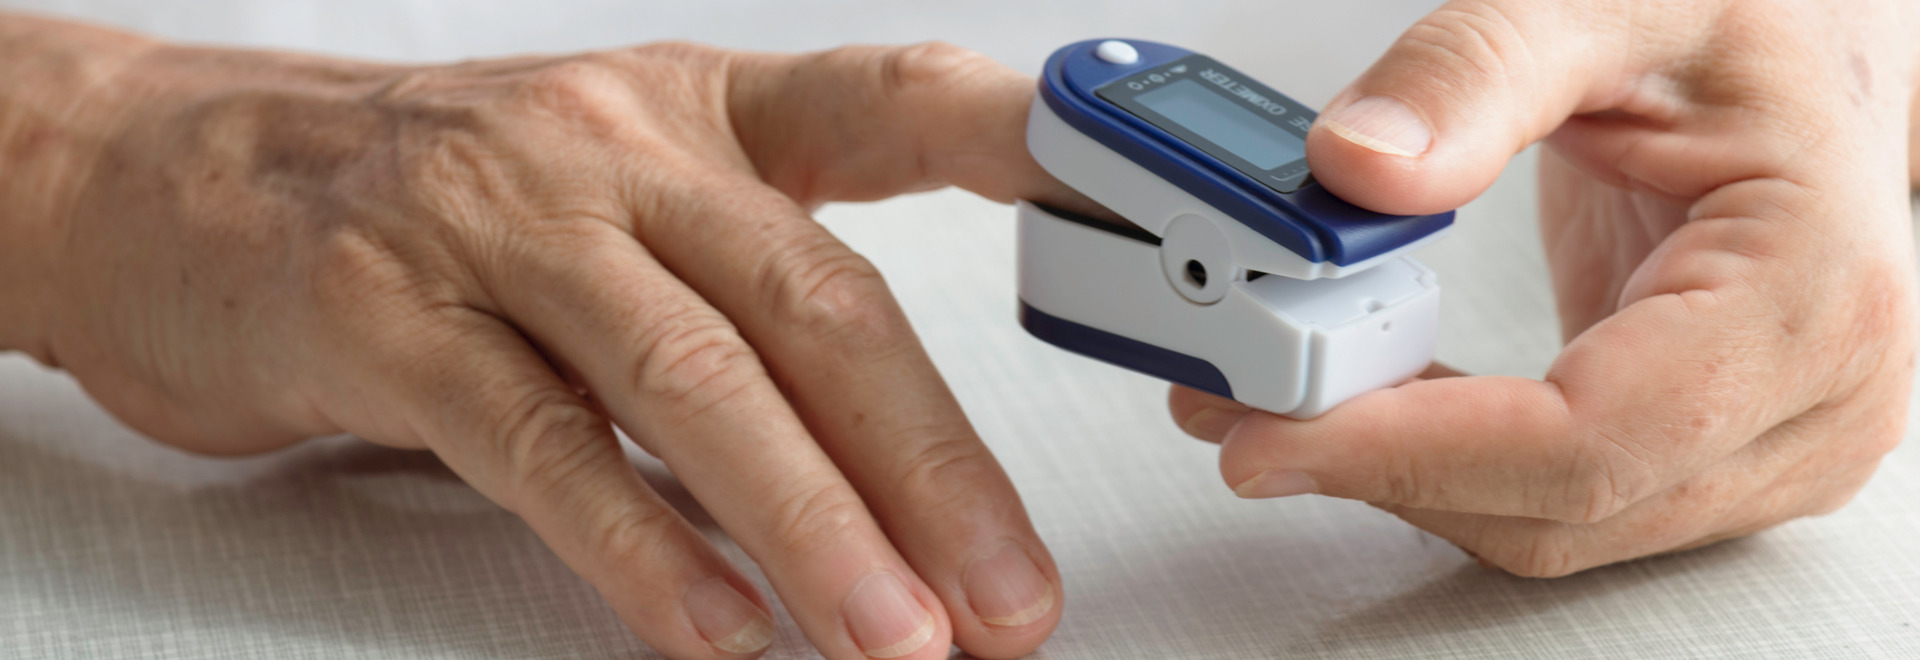 how-to-use-pulse-oximeter-at-home-for-coronavirus-patients